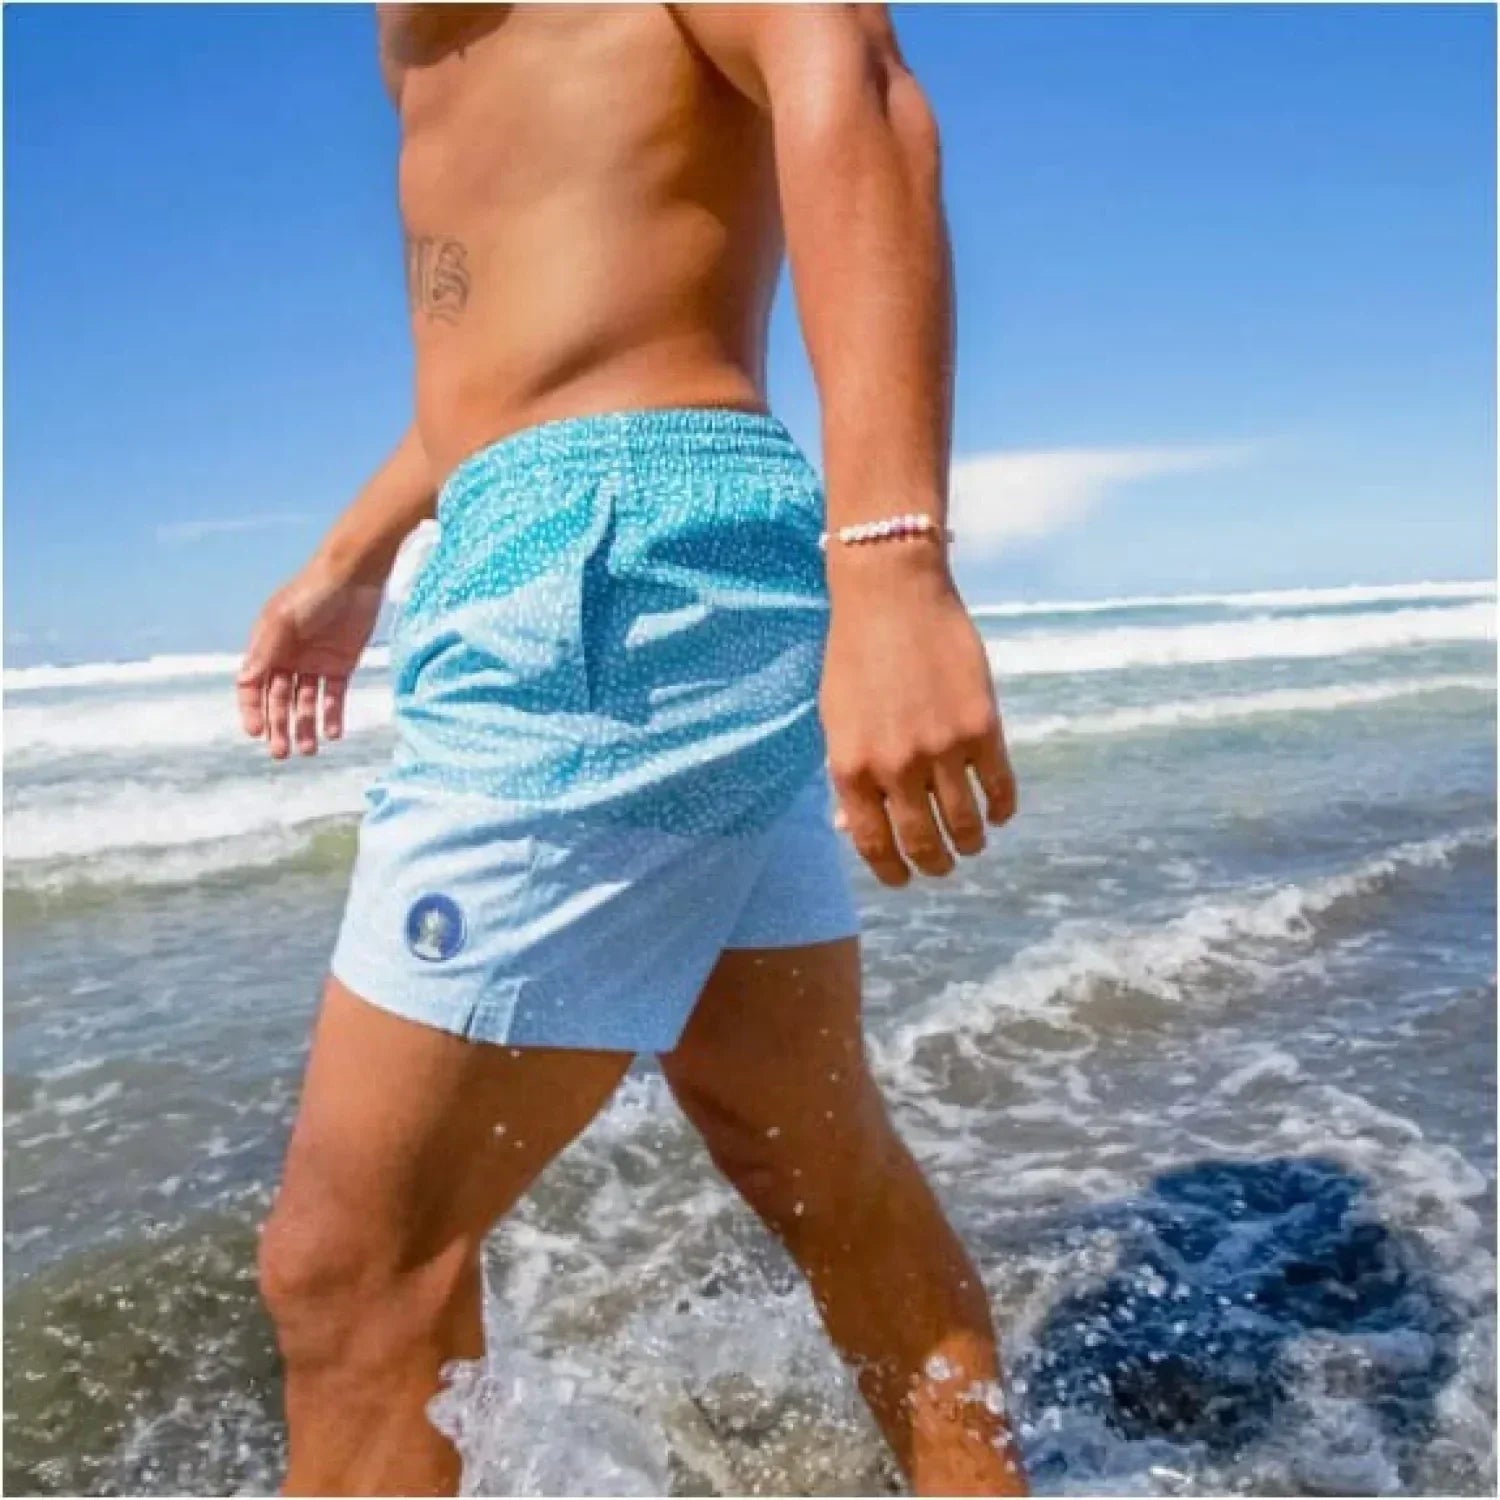 Chubbies 01. MENS APPAREL - MENS SHORTS - MENS SHORTS ACTIVE Men's The Classic Trunk - 5.5 in THE WHALE SHARKS